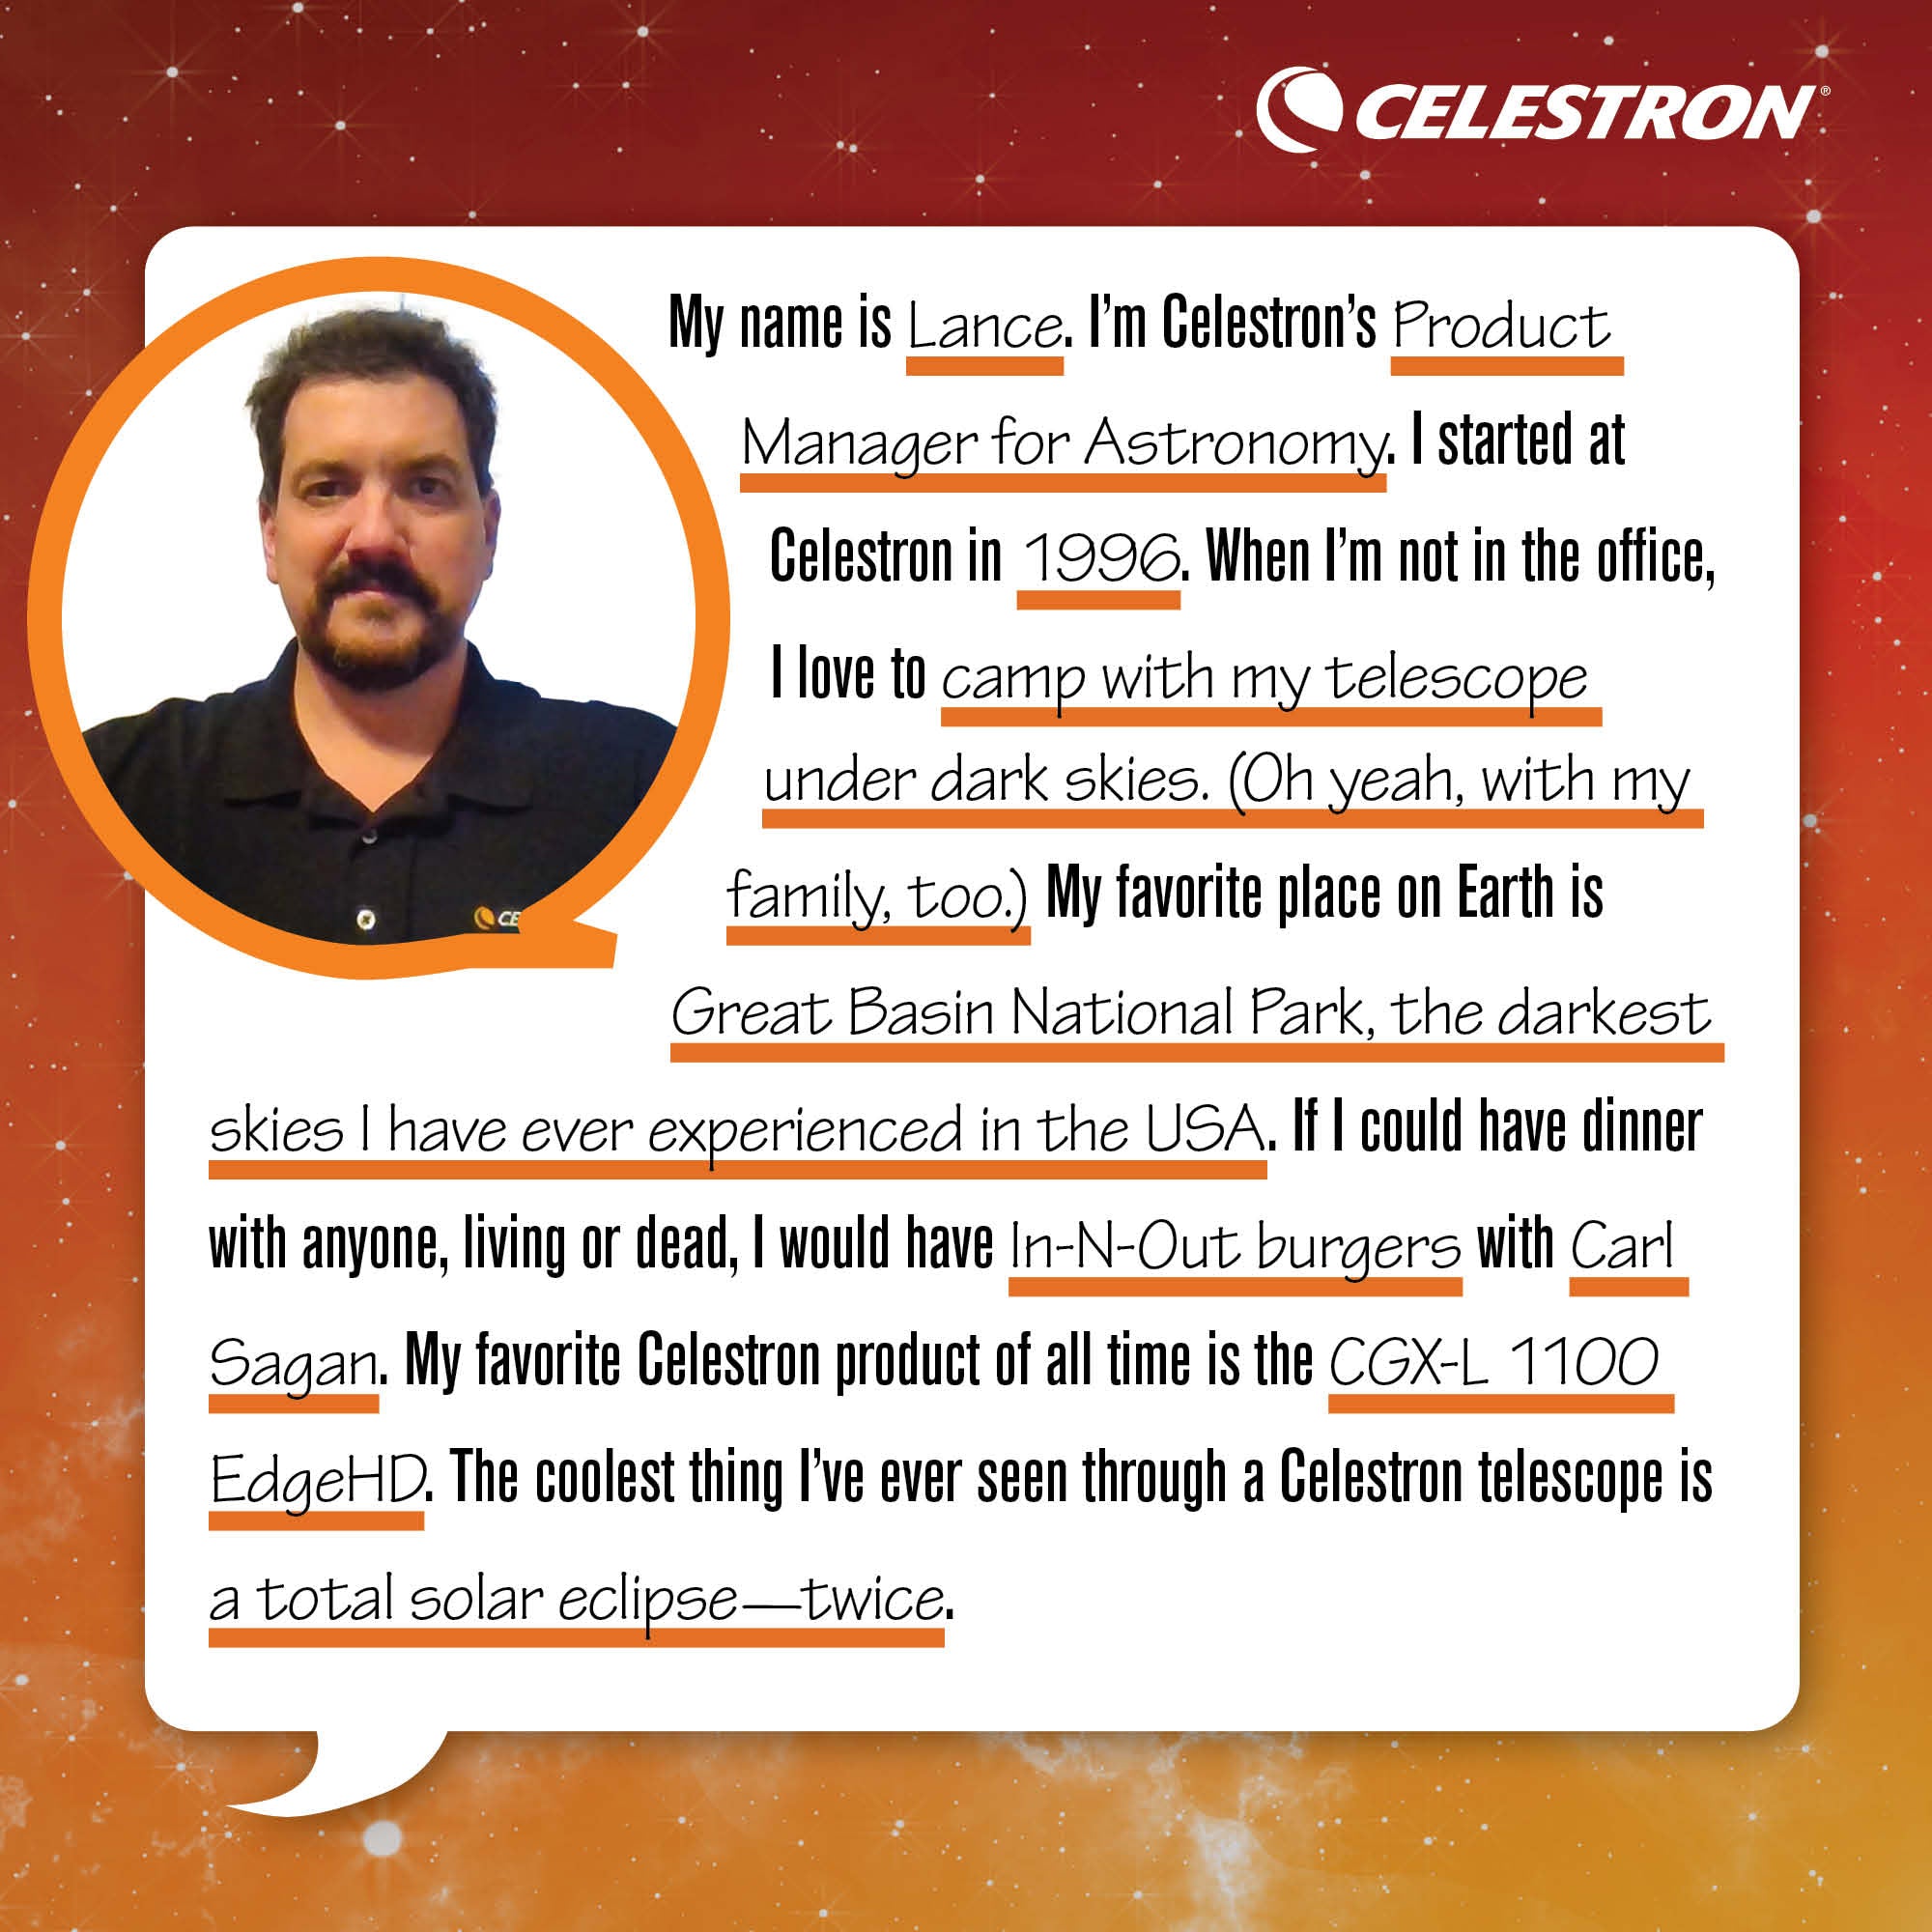 My name is Lance. I'm Celestron's Product Manger for Astronomy. I started at Celestron in 1996. When I'm not in the office, I love to camp with my telescope under dark skies. (Oh yeah, with my family too.).  My favorite place on Earth is Great Basin National Park, the darkest skies I have ever experienced in the USA. If I could have dinner with anyone, living or dead, I would have In-N-Out burgers with Carl Sagan. My favorite Celestron product of all time is the CGX-L 1100 EdgeHD. The coolest thing I've ever seen through a Celestron telescope is a total solar eclipse - twice.